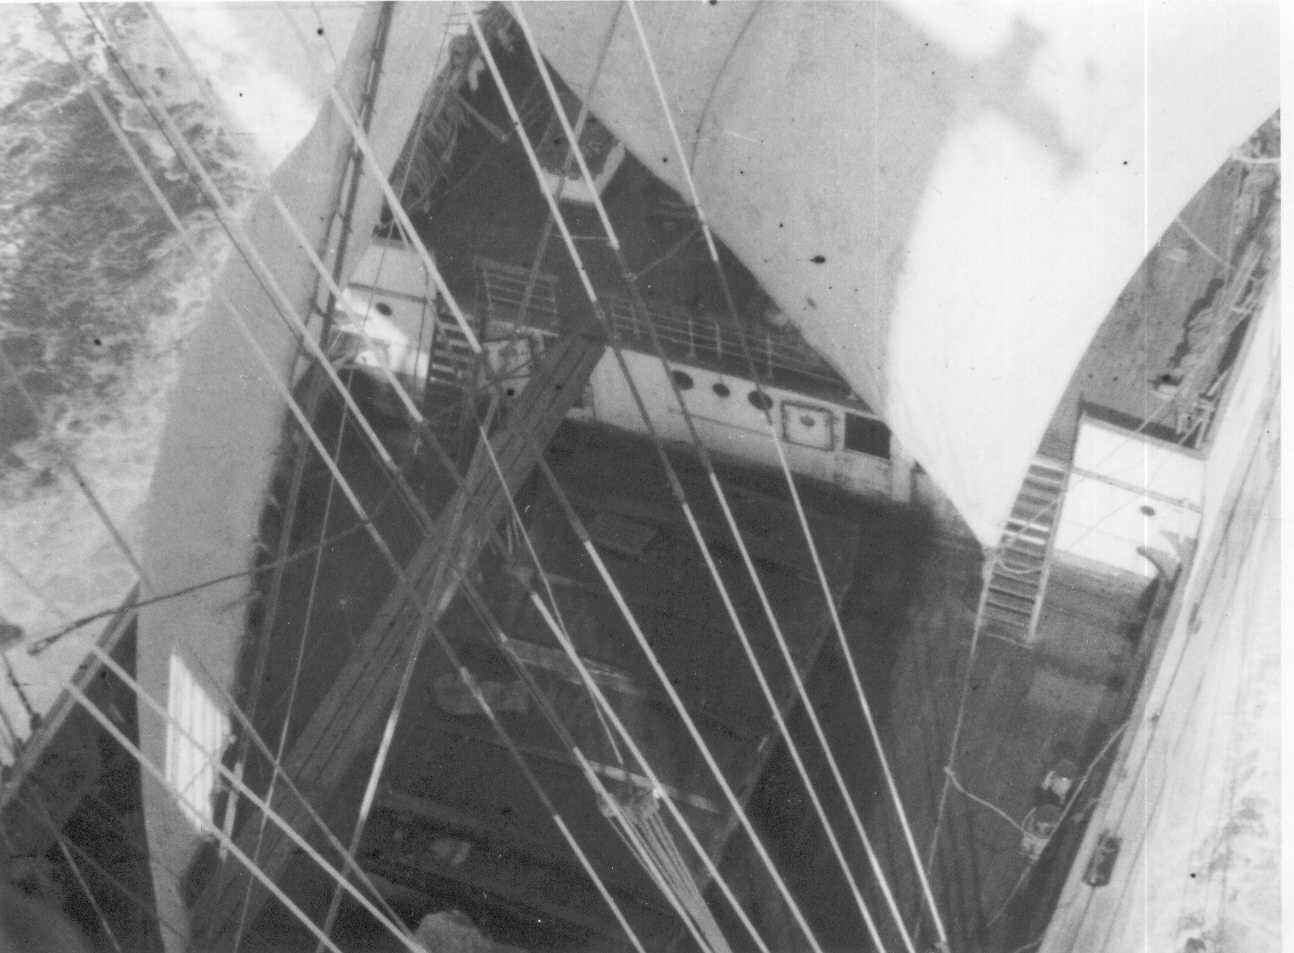 Barque - No. 2 hatch from fore rig